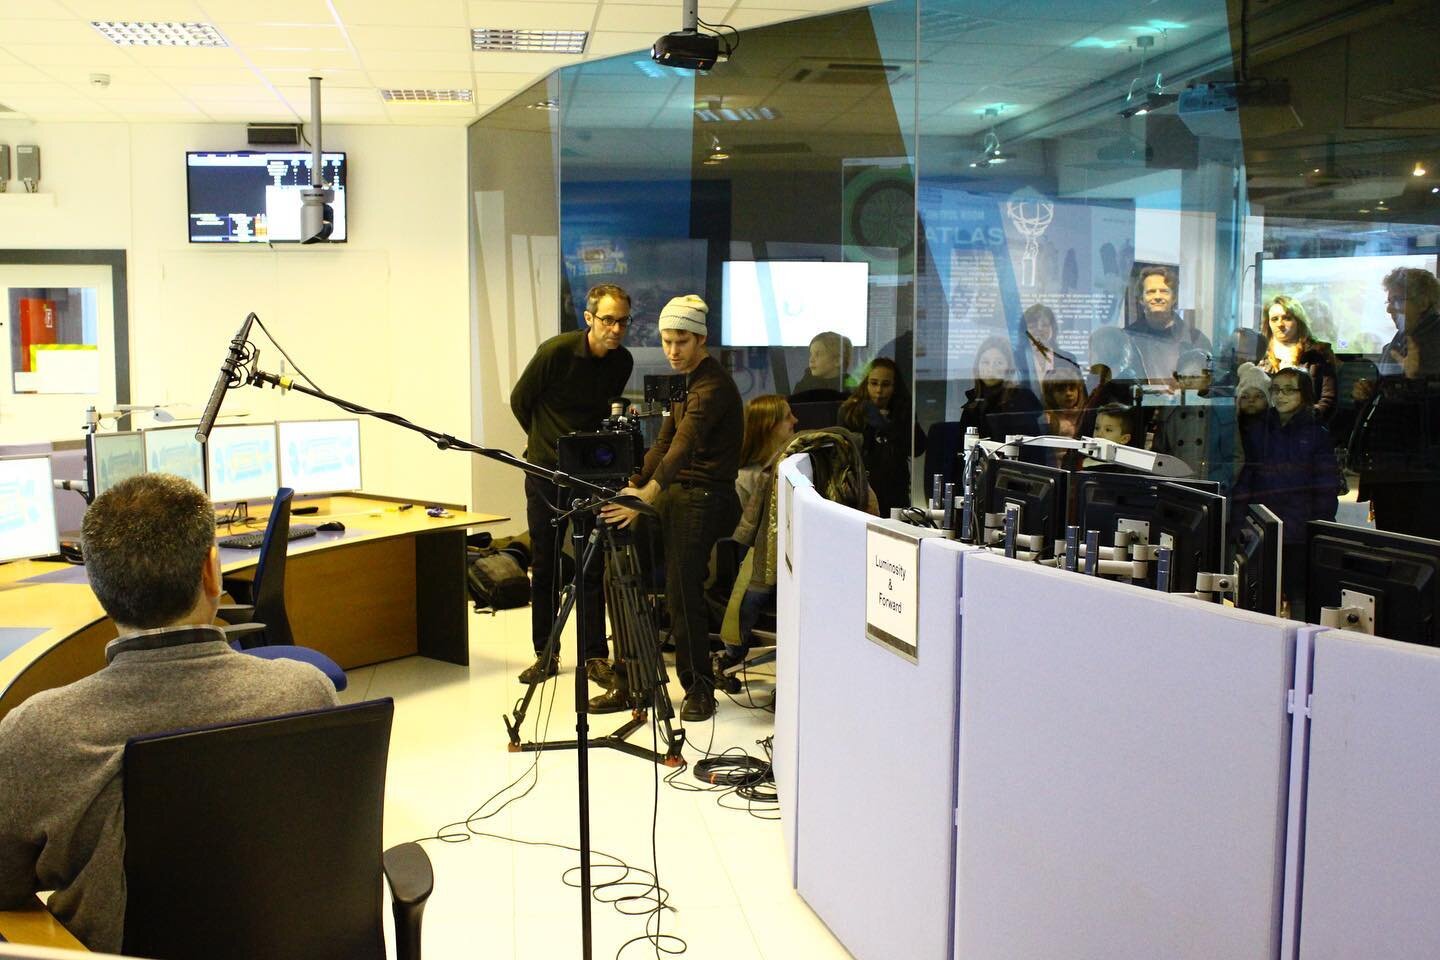 Setting up for an interview in the ATLAS Control Room of CERN&rsquo;s Large Hadron Collider. (Meyrin, Switzerland).